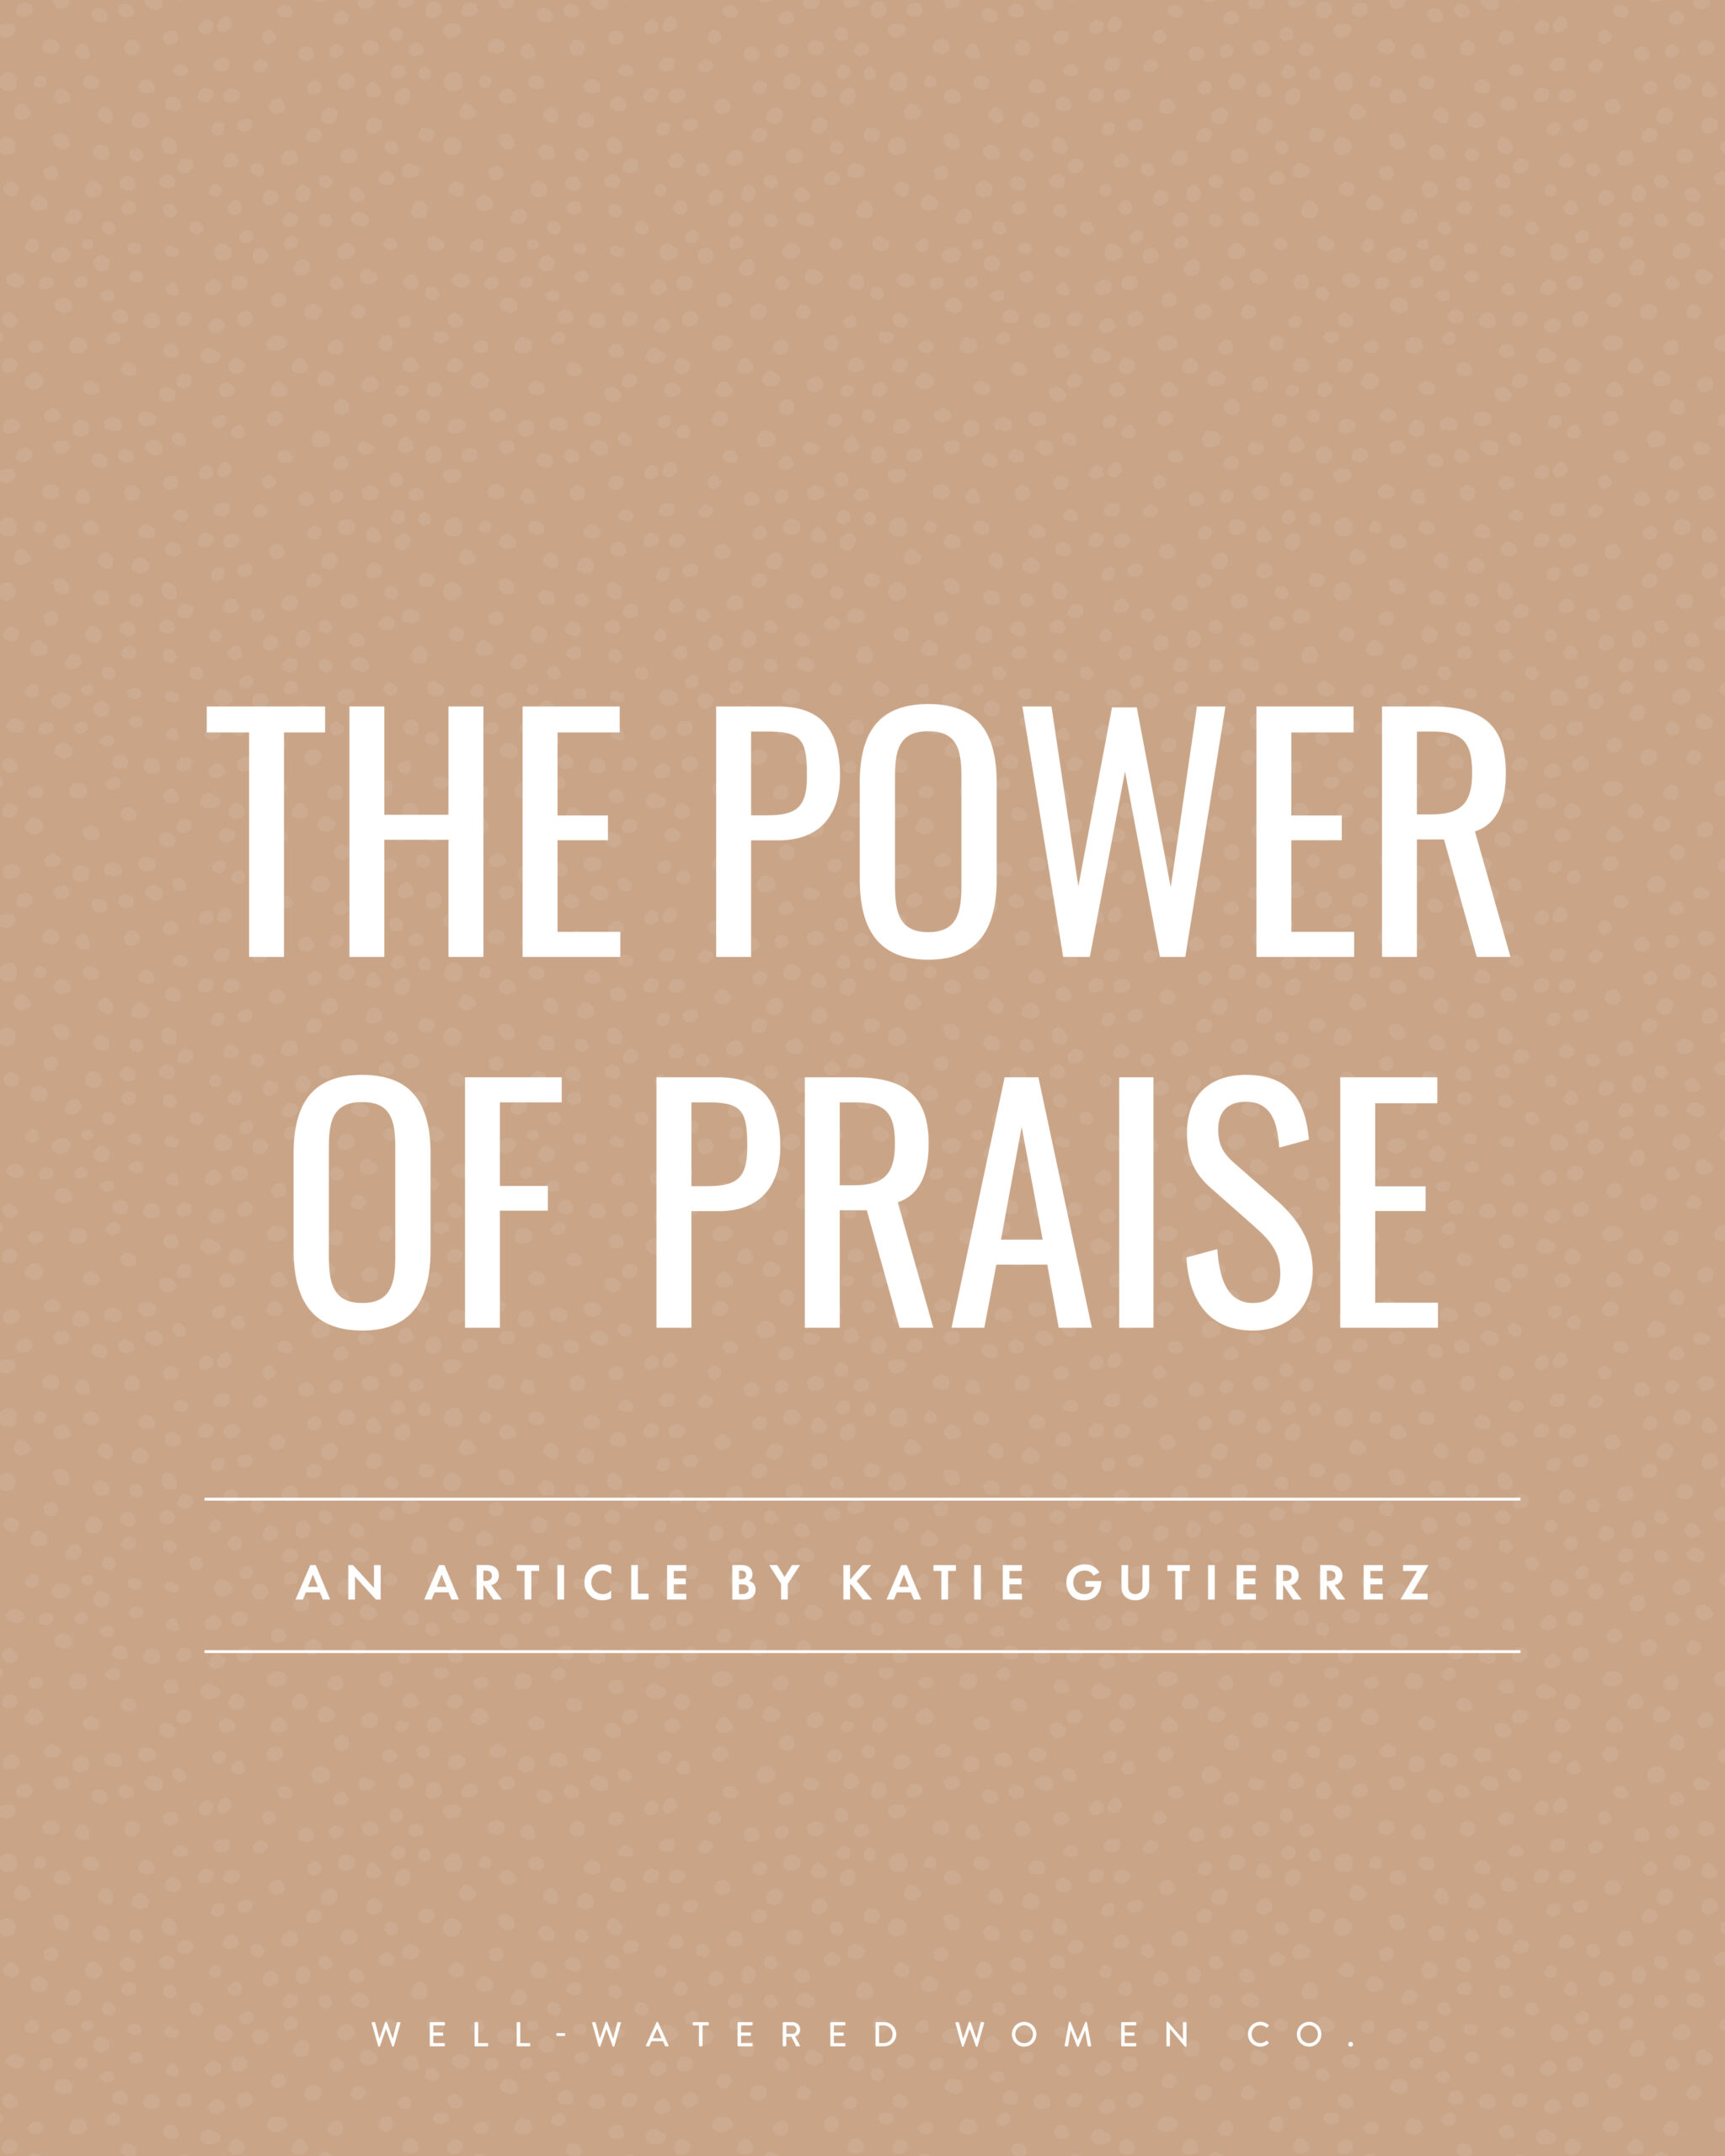 The Power of Praise - an article from Well-Watered Women